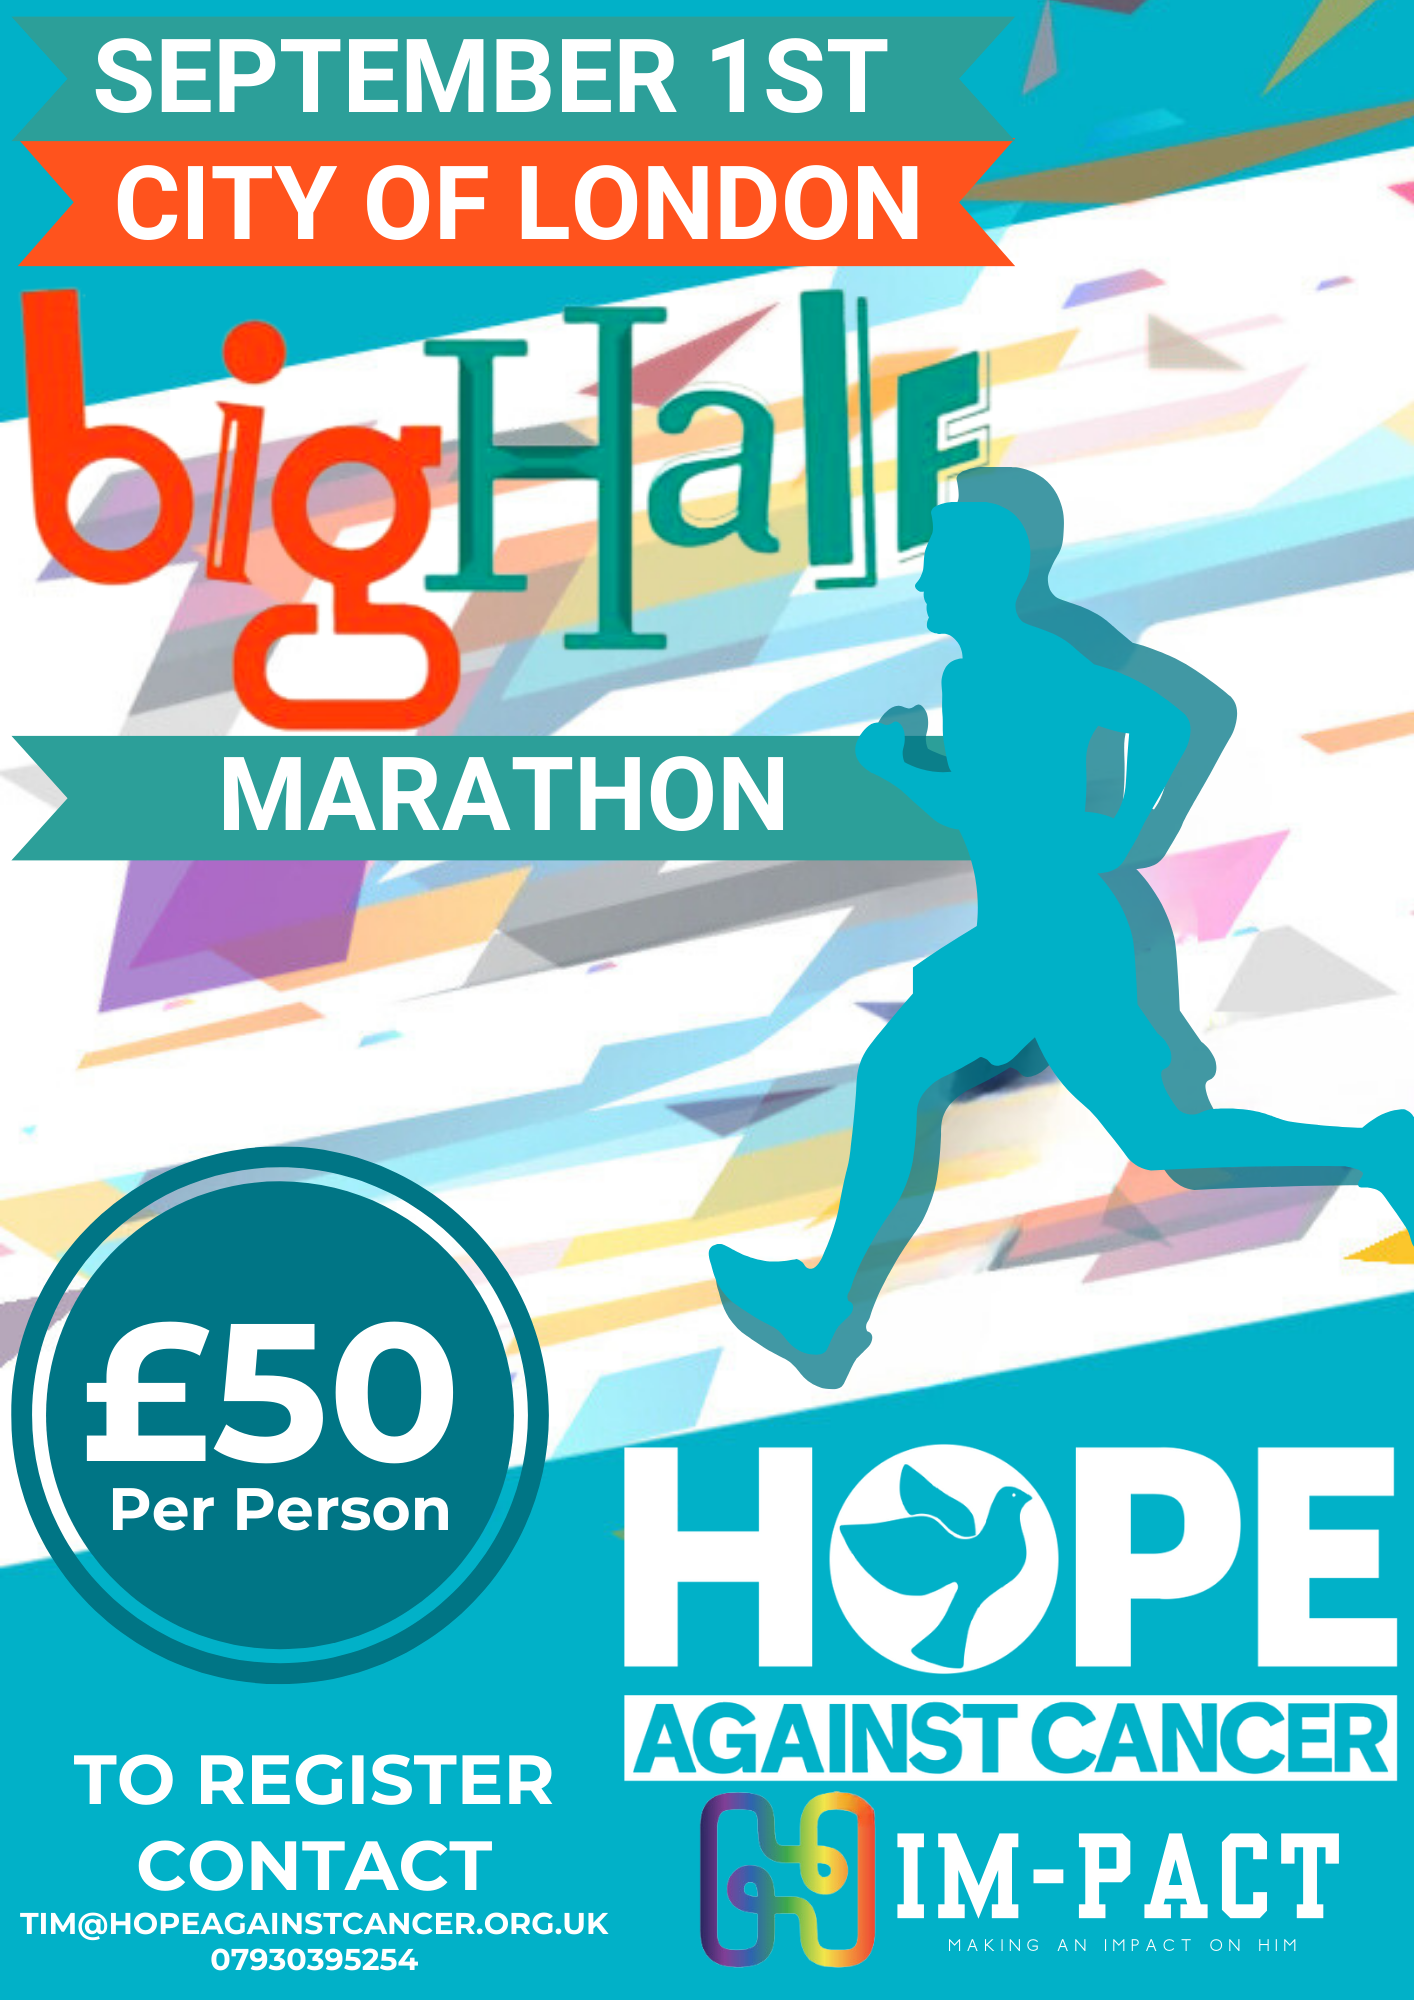 Run The Big Half for Hope Against Cancer